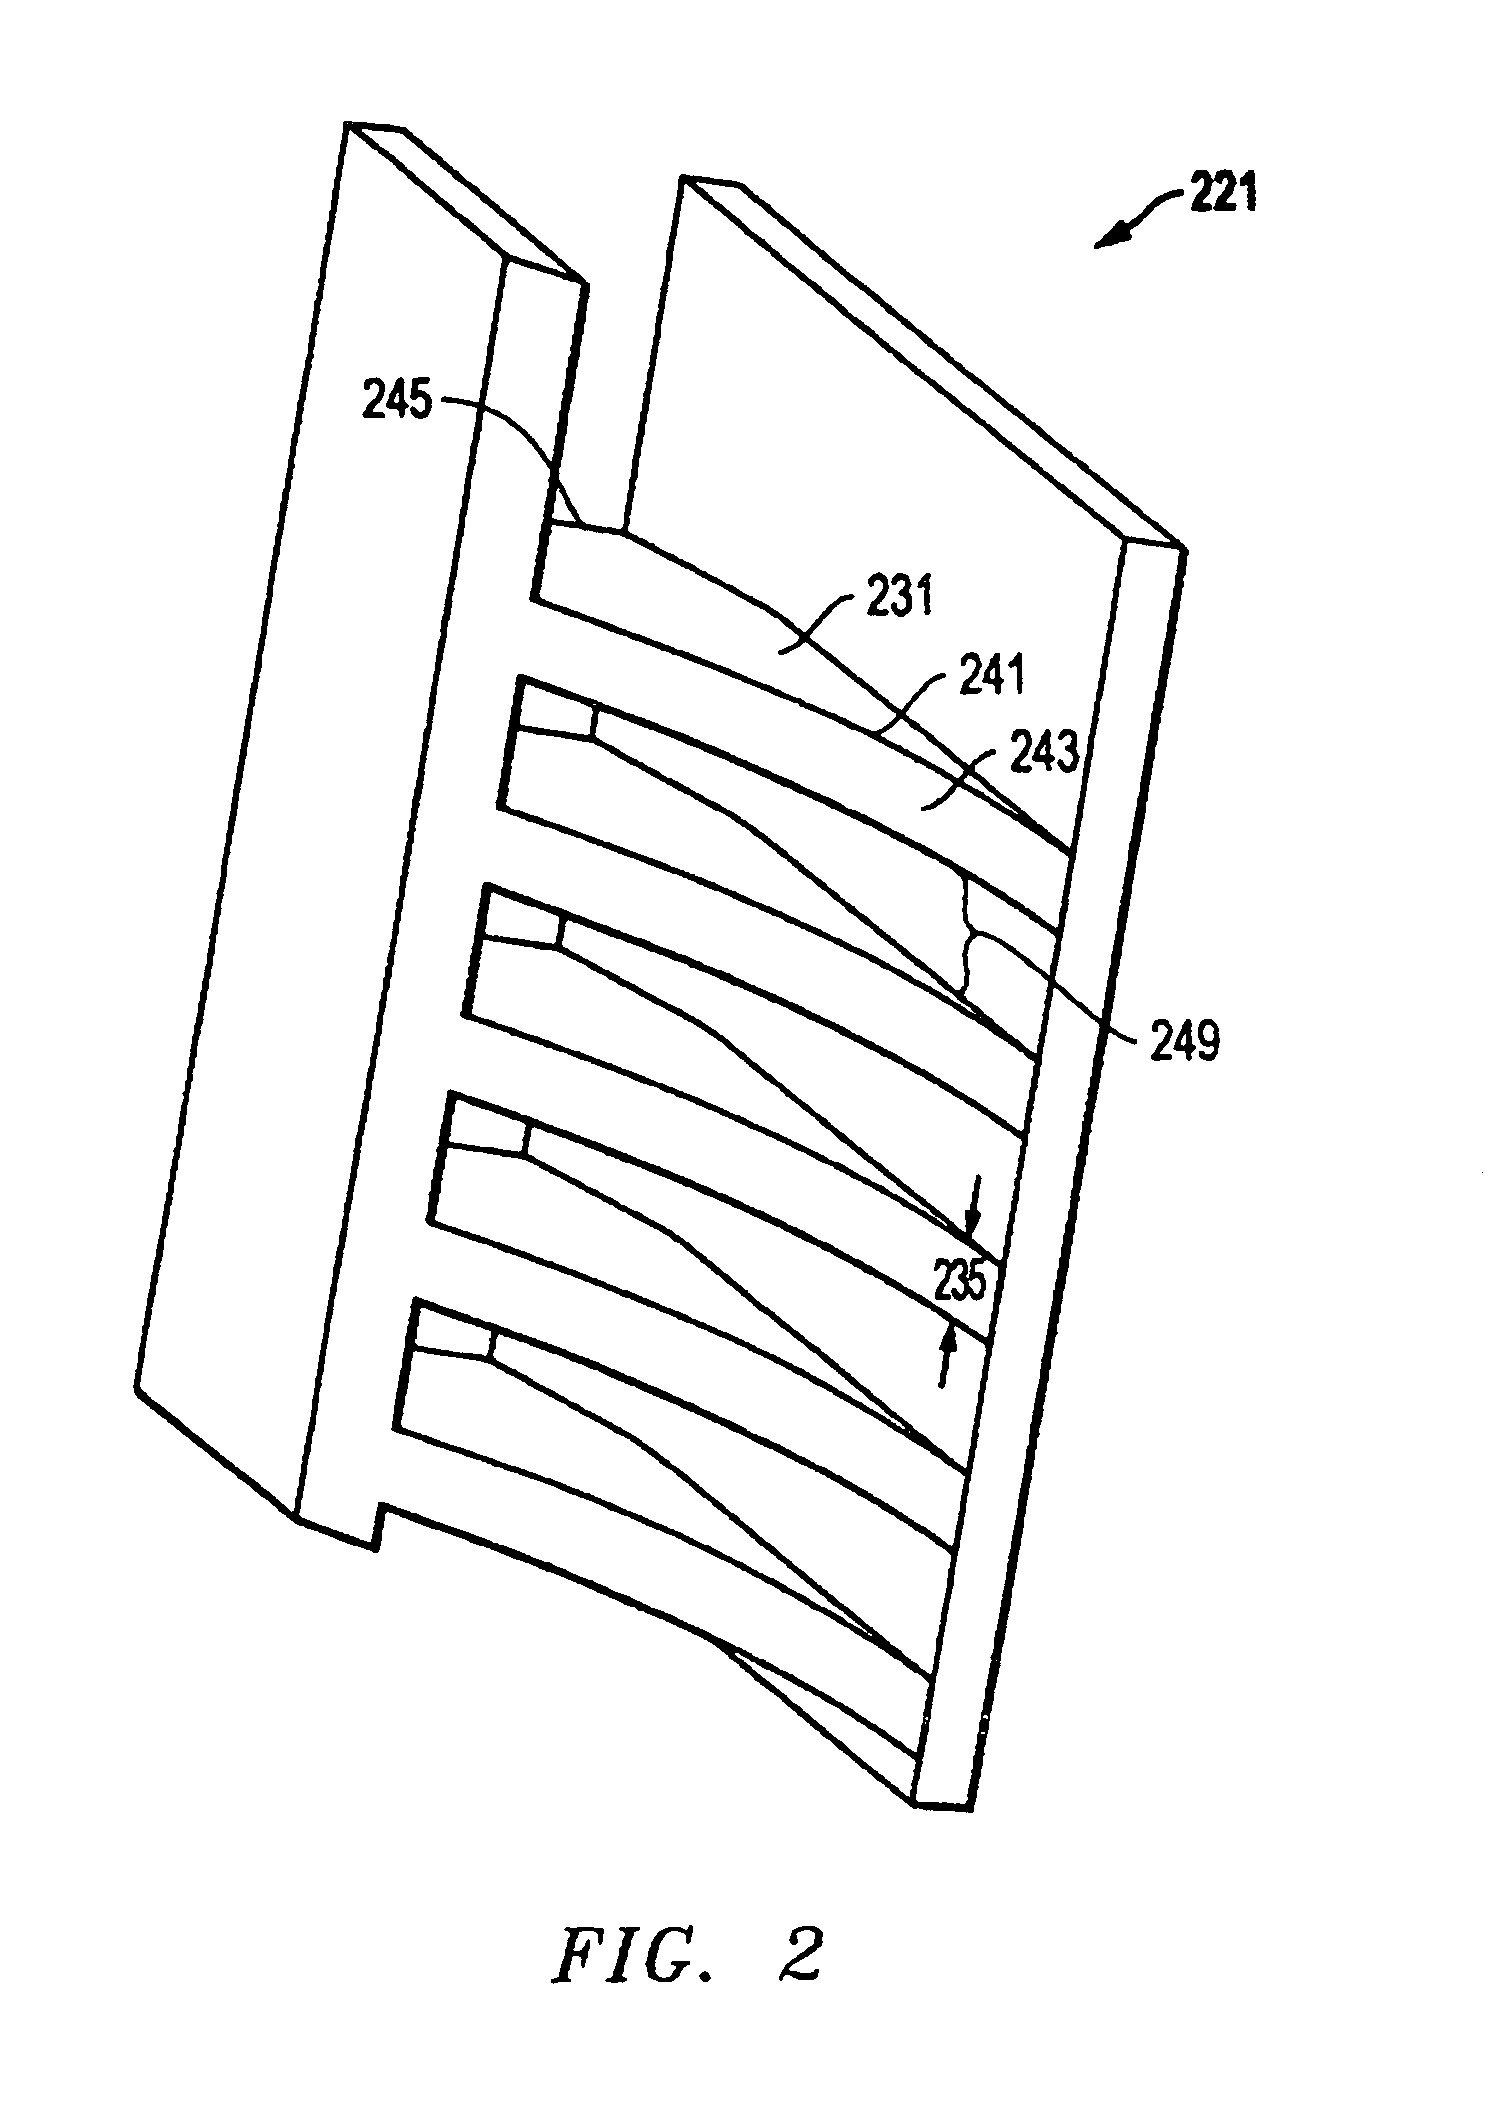 Hard disk drive with aerodynamic diffuser, contraction, and fairing for disk base and re-acceleration drag reduction